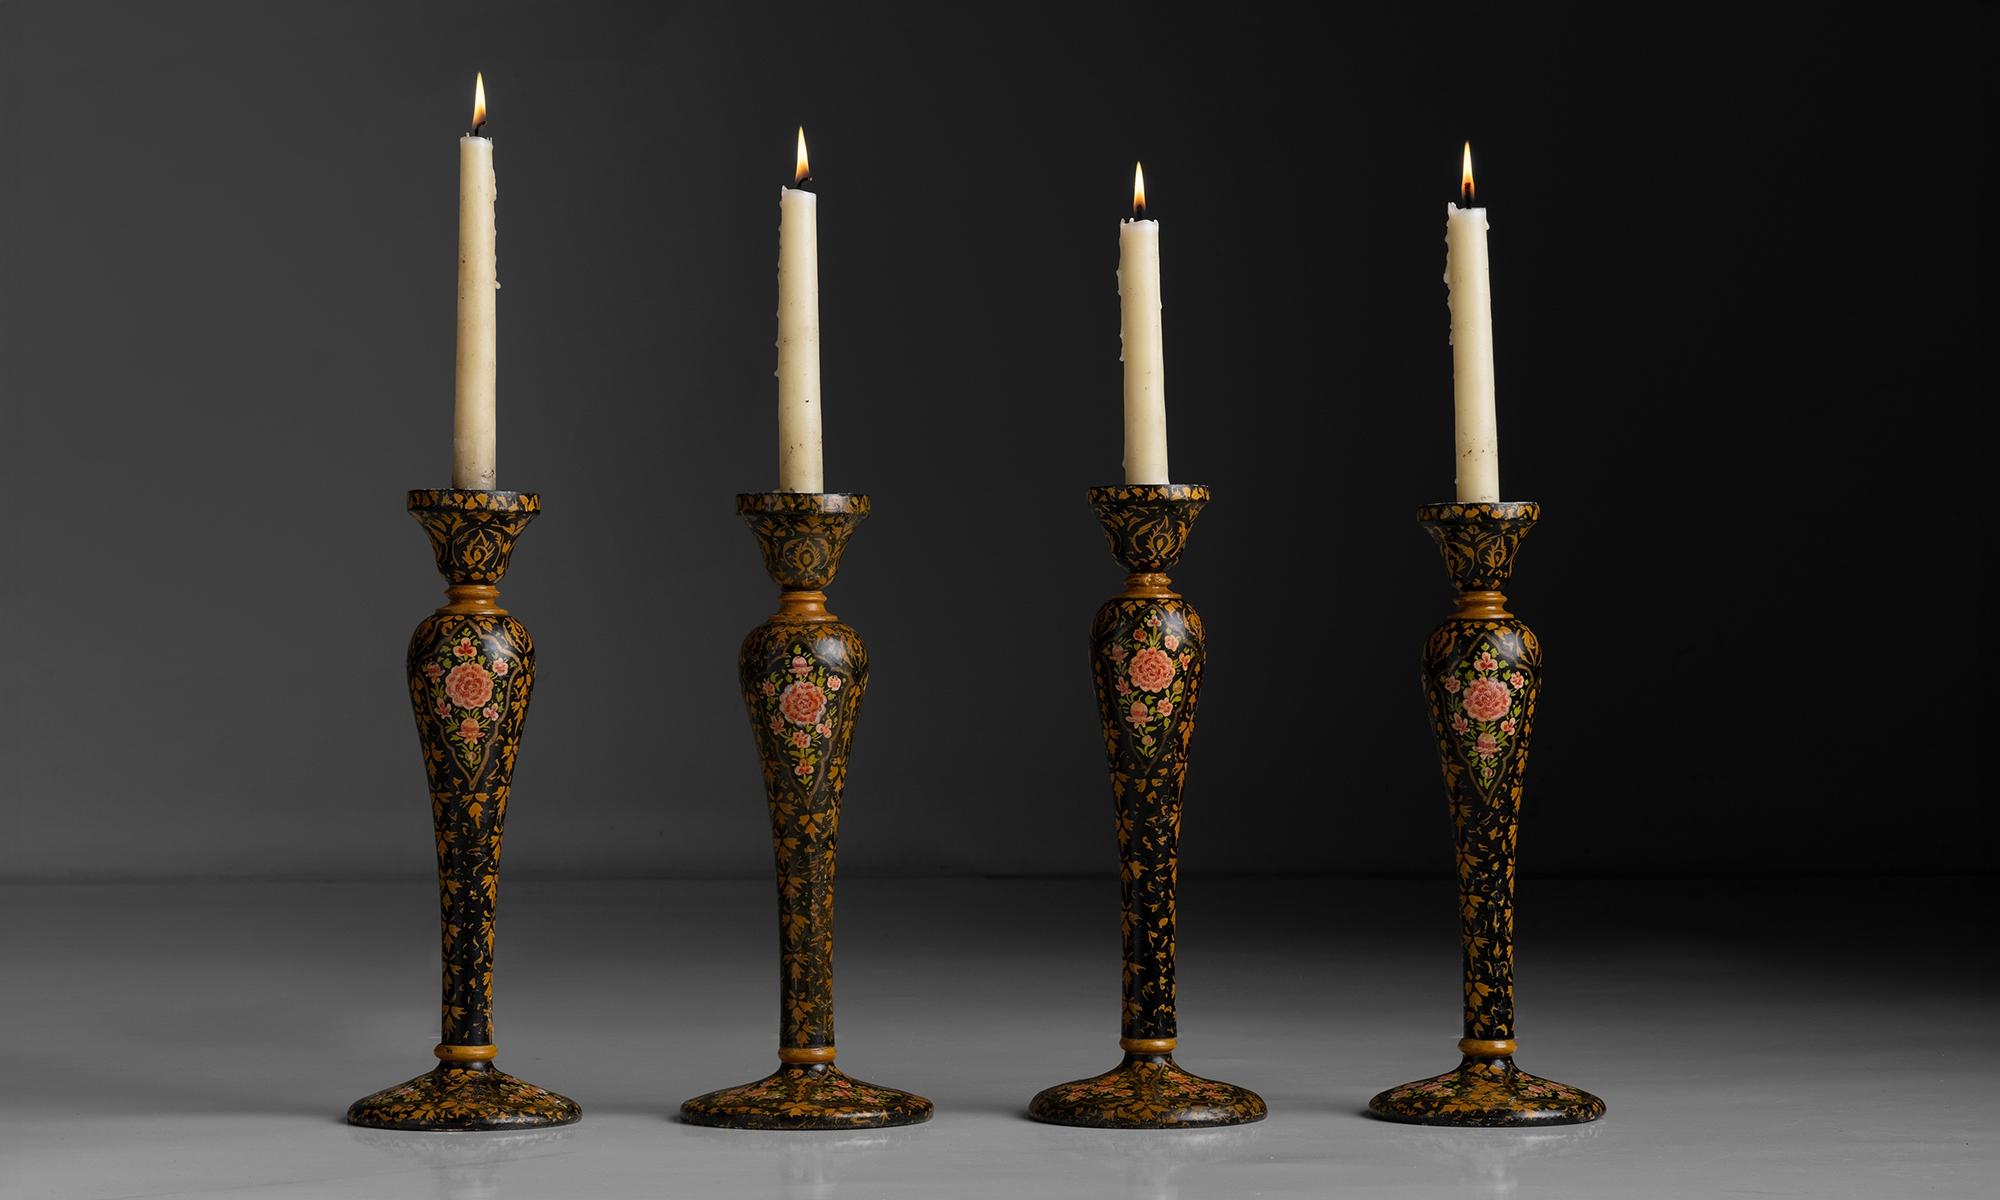 India circa 1910

Carved wood and lacquer candlesticks with floral motif.

5.5”dia x 14”h